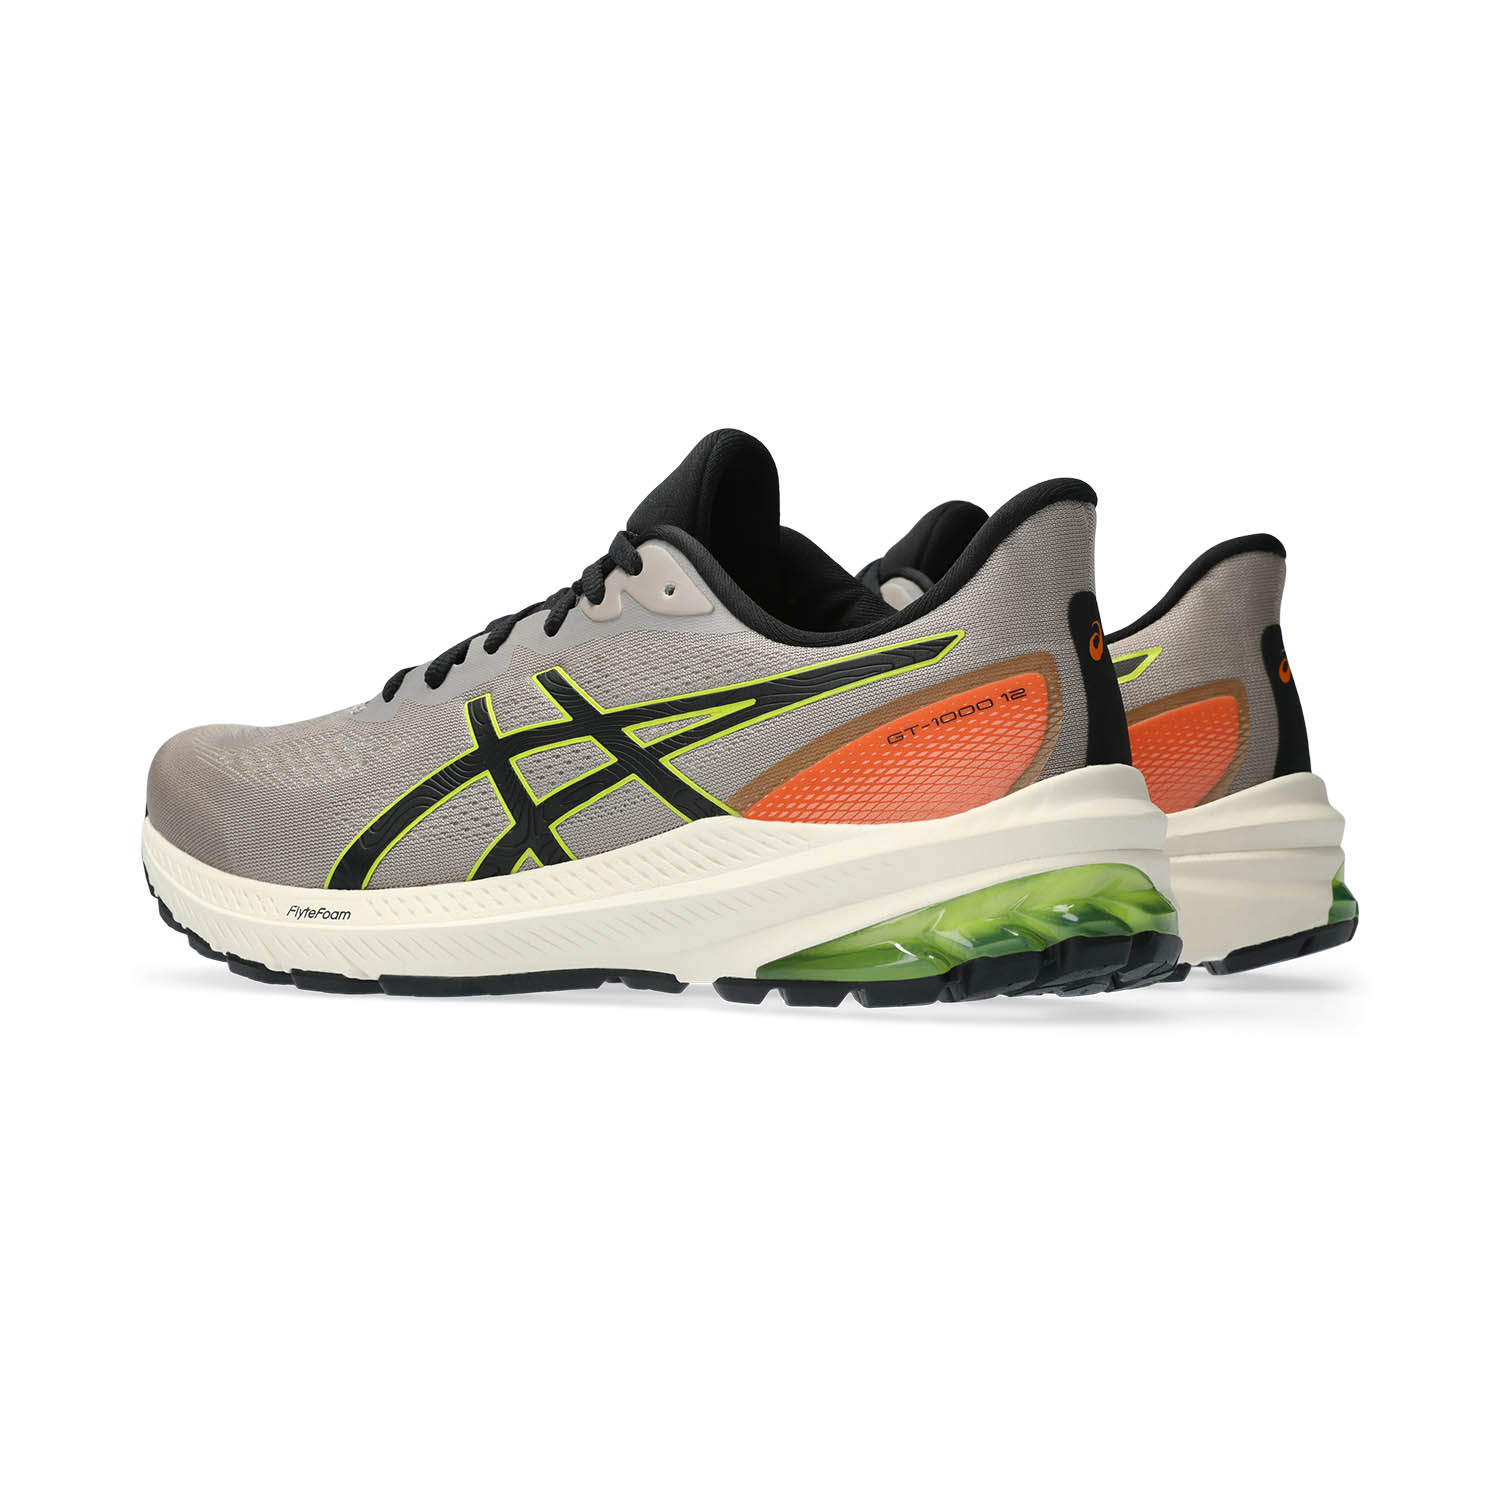 Asics GT 1000 12 TR - Nature Bathing/Neon Lime